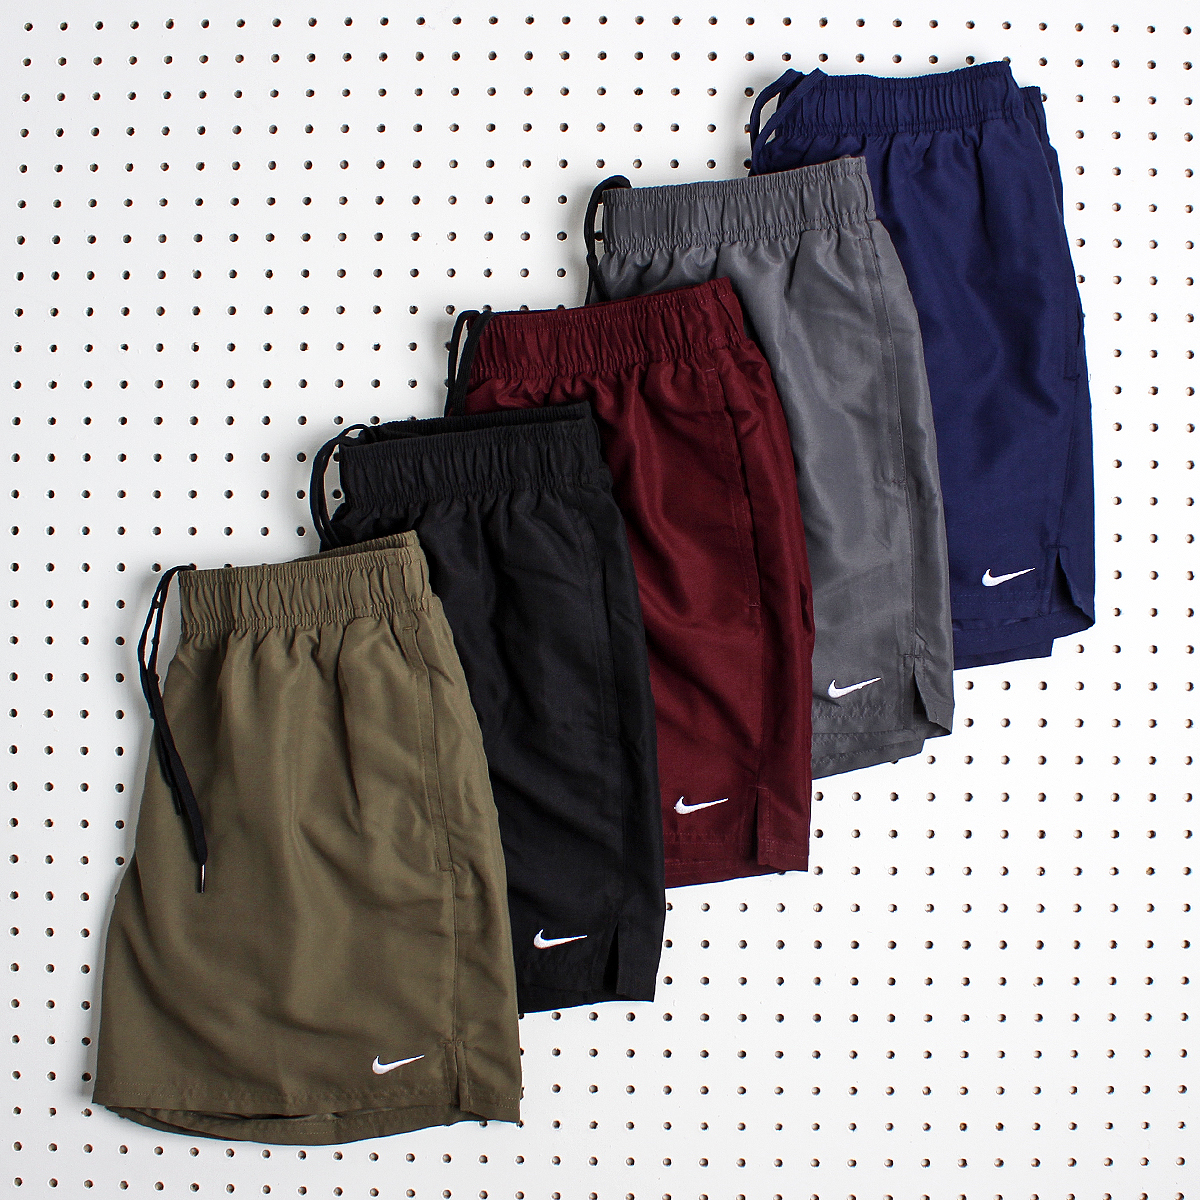 Vandt Udflugt Snuble Urban Industry on Twitter: "These are the new Nike Swim Core Solid Shorts,  perhaps the ideal lockdown lounging short? Built from 100% polyester  mechanical stretch twill that's durable, comfortable and sheds water,